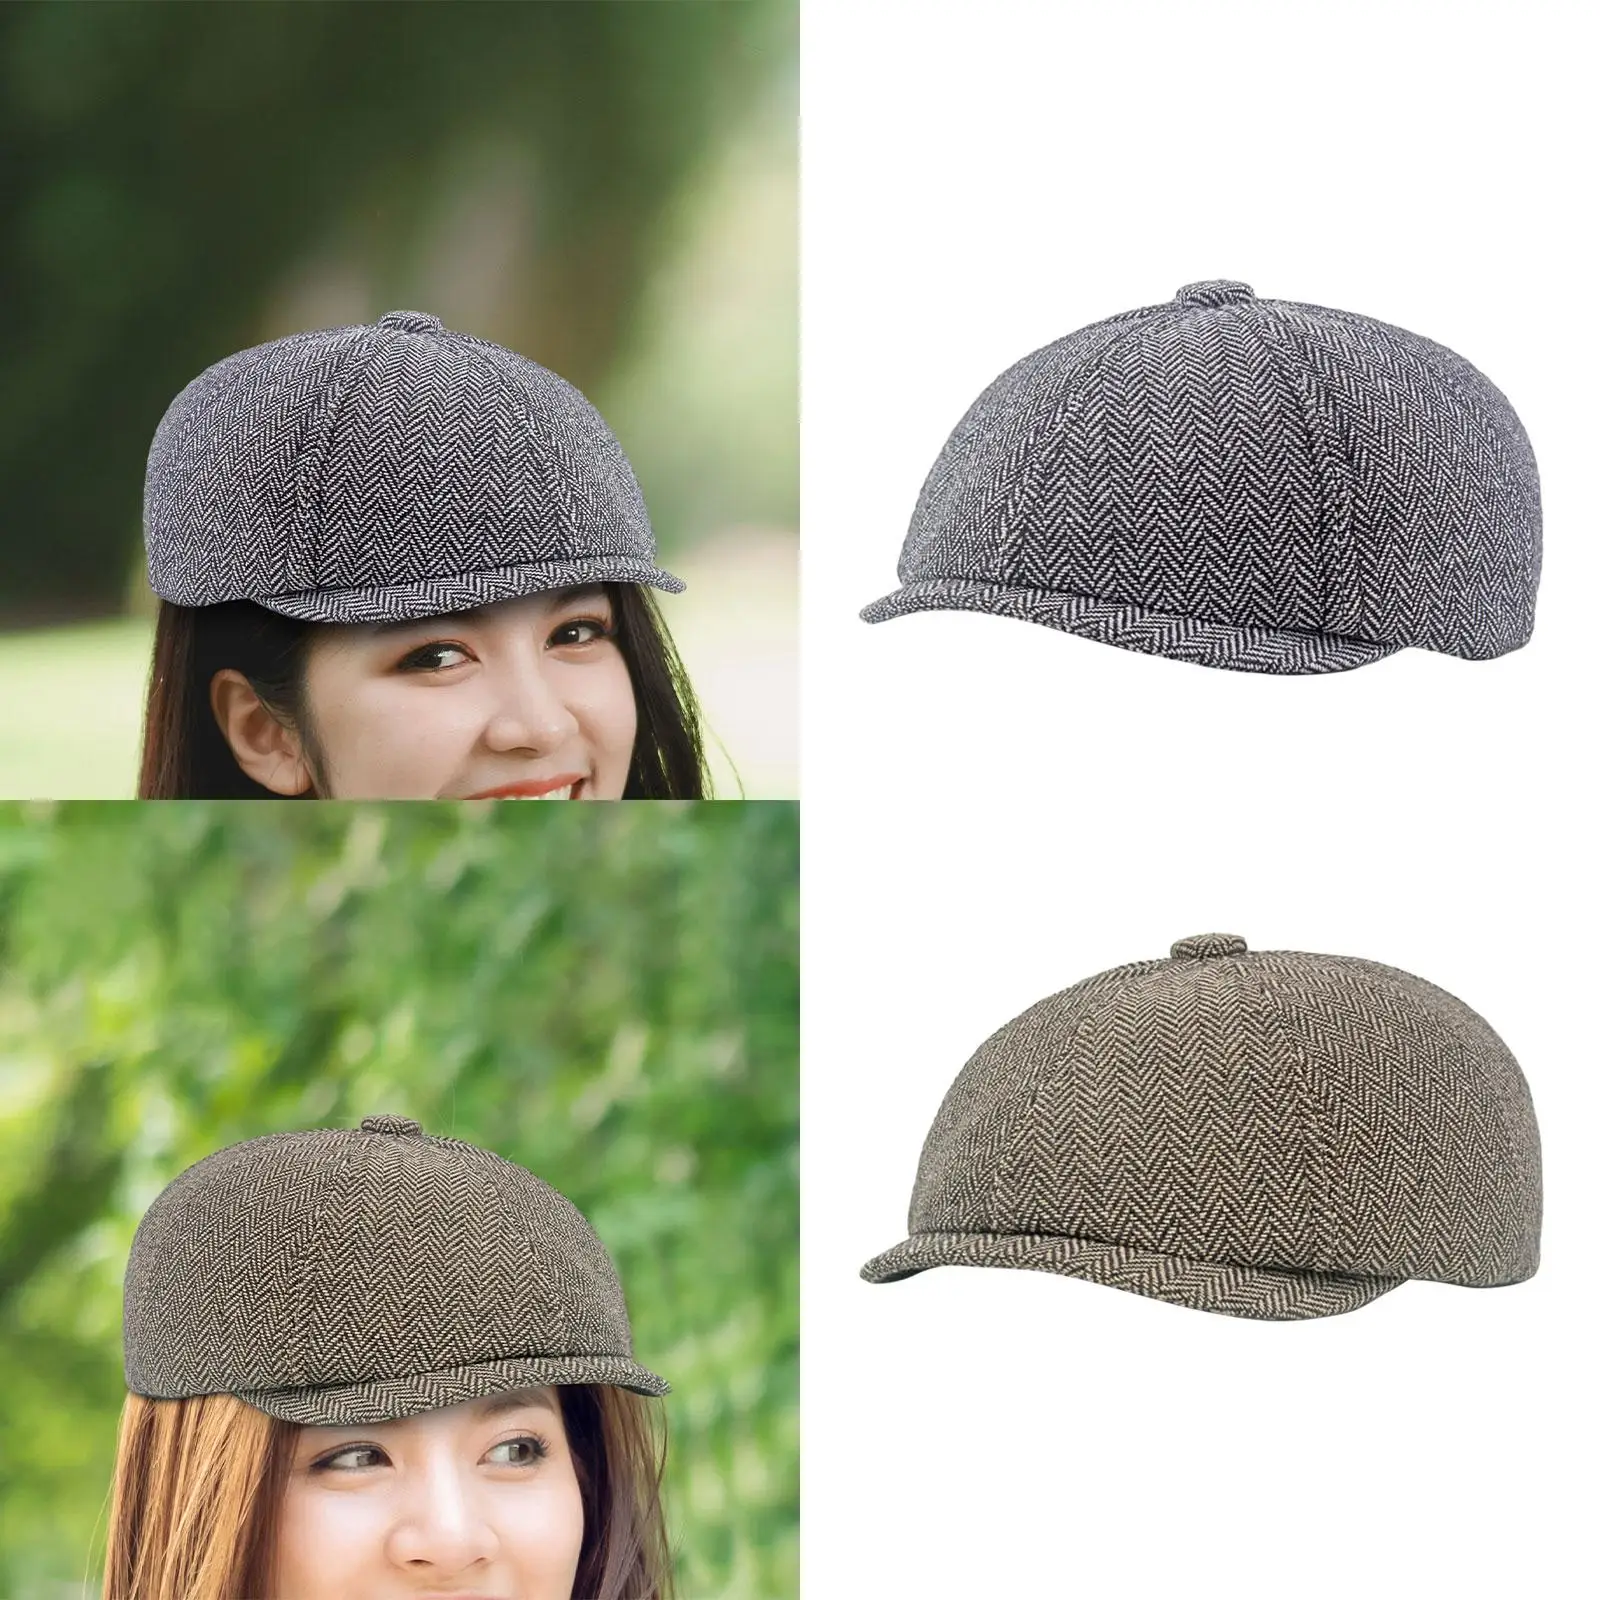 Men Beret Hat Golf Hat Adjustable Classic Autumn Winter Casual Fashion Gift Flat Cap for Camping Travel Driving Hiking Outdoor